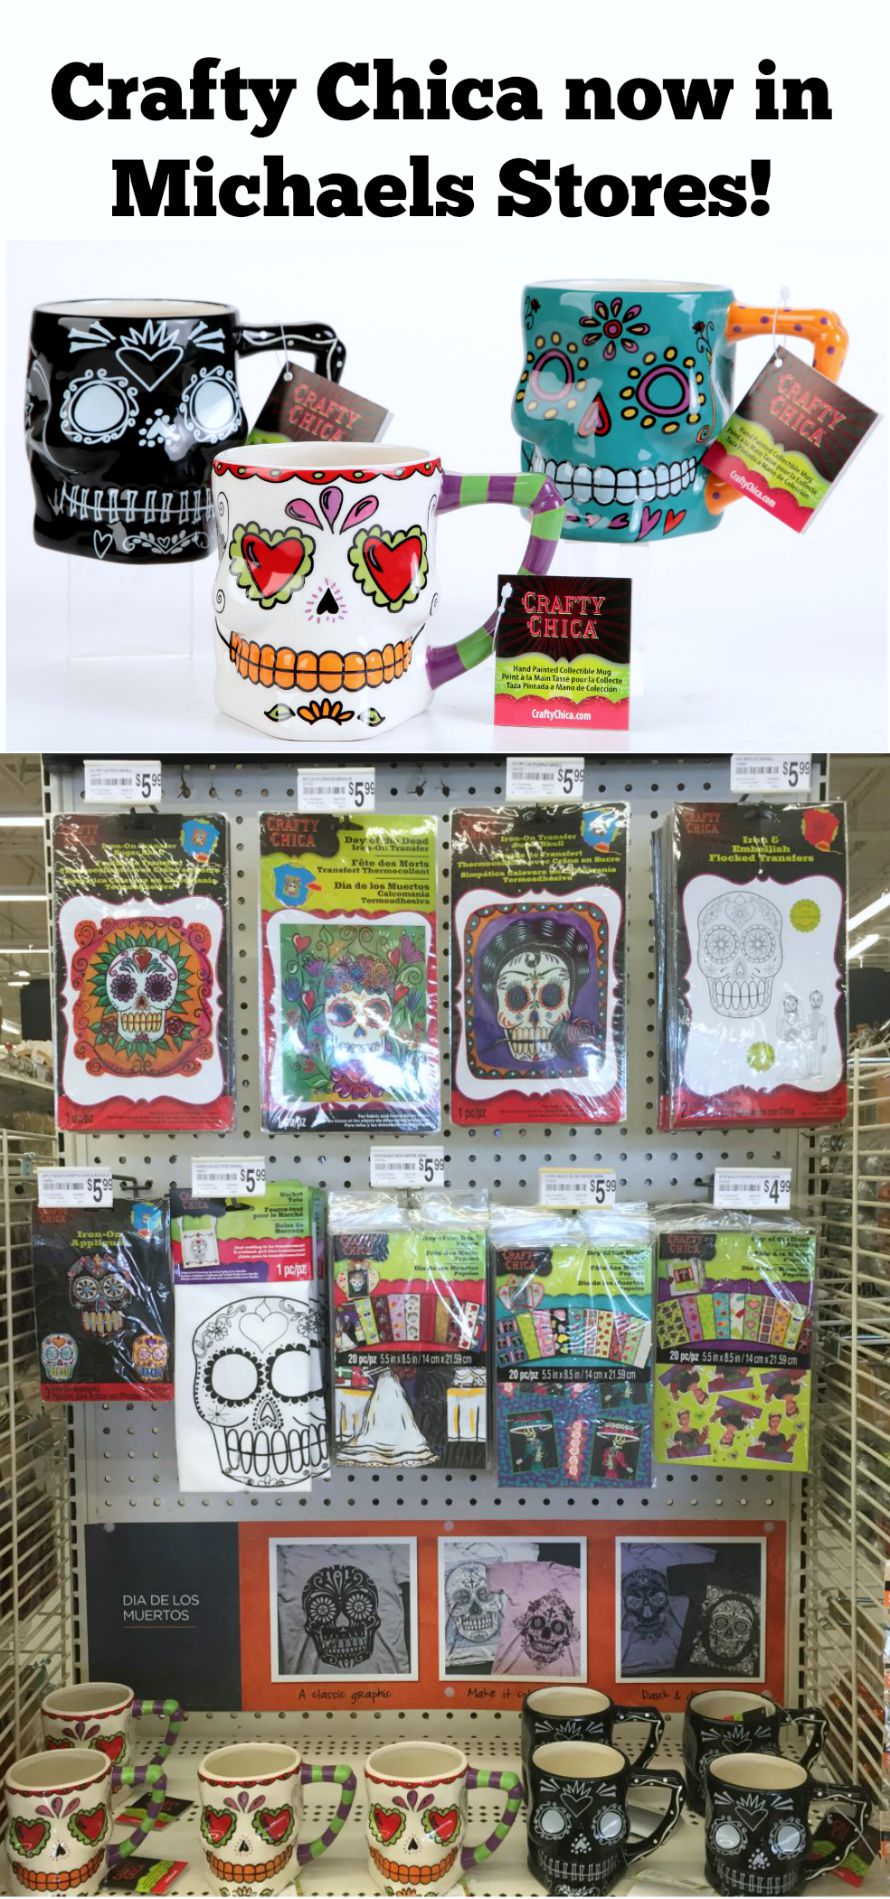 Crafty Chica products at Michaels